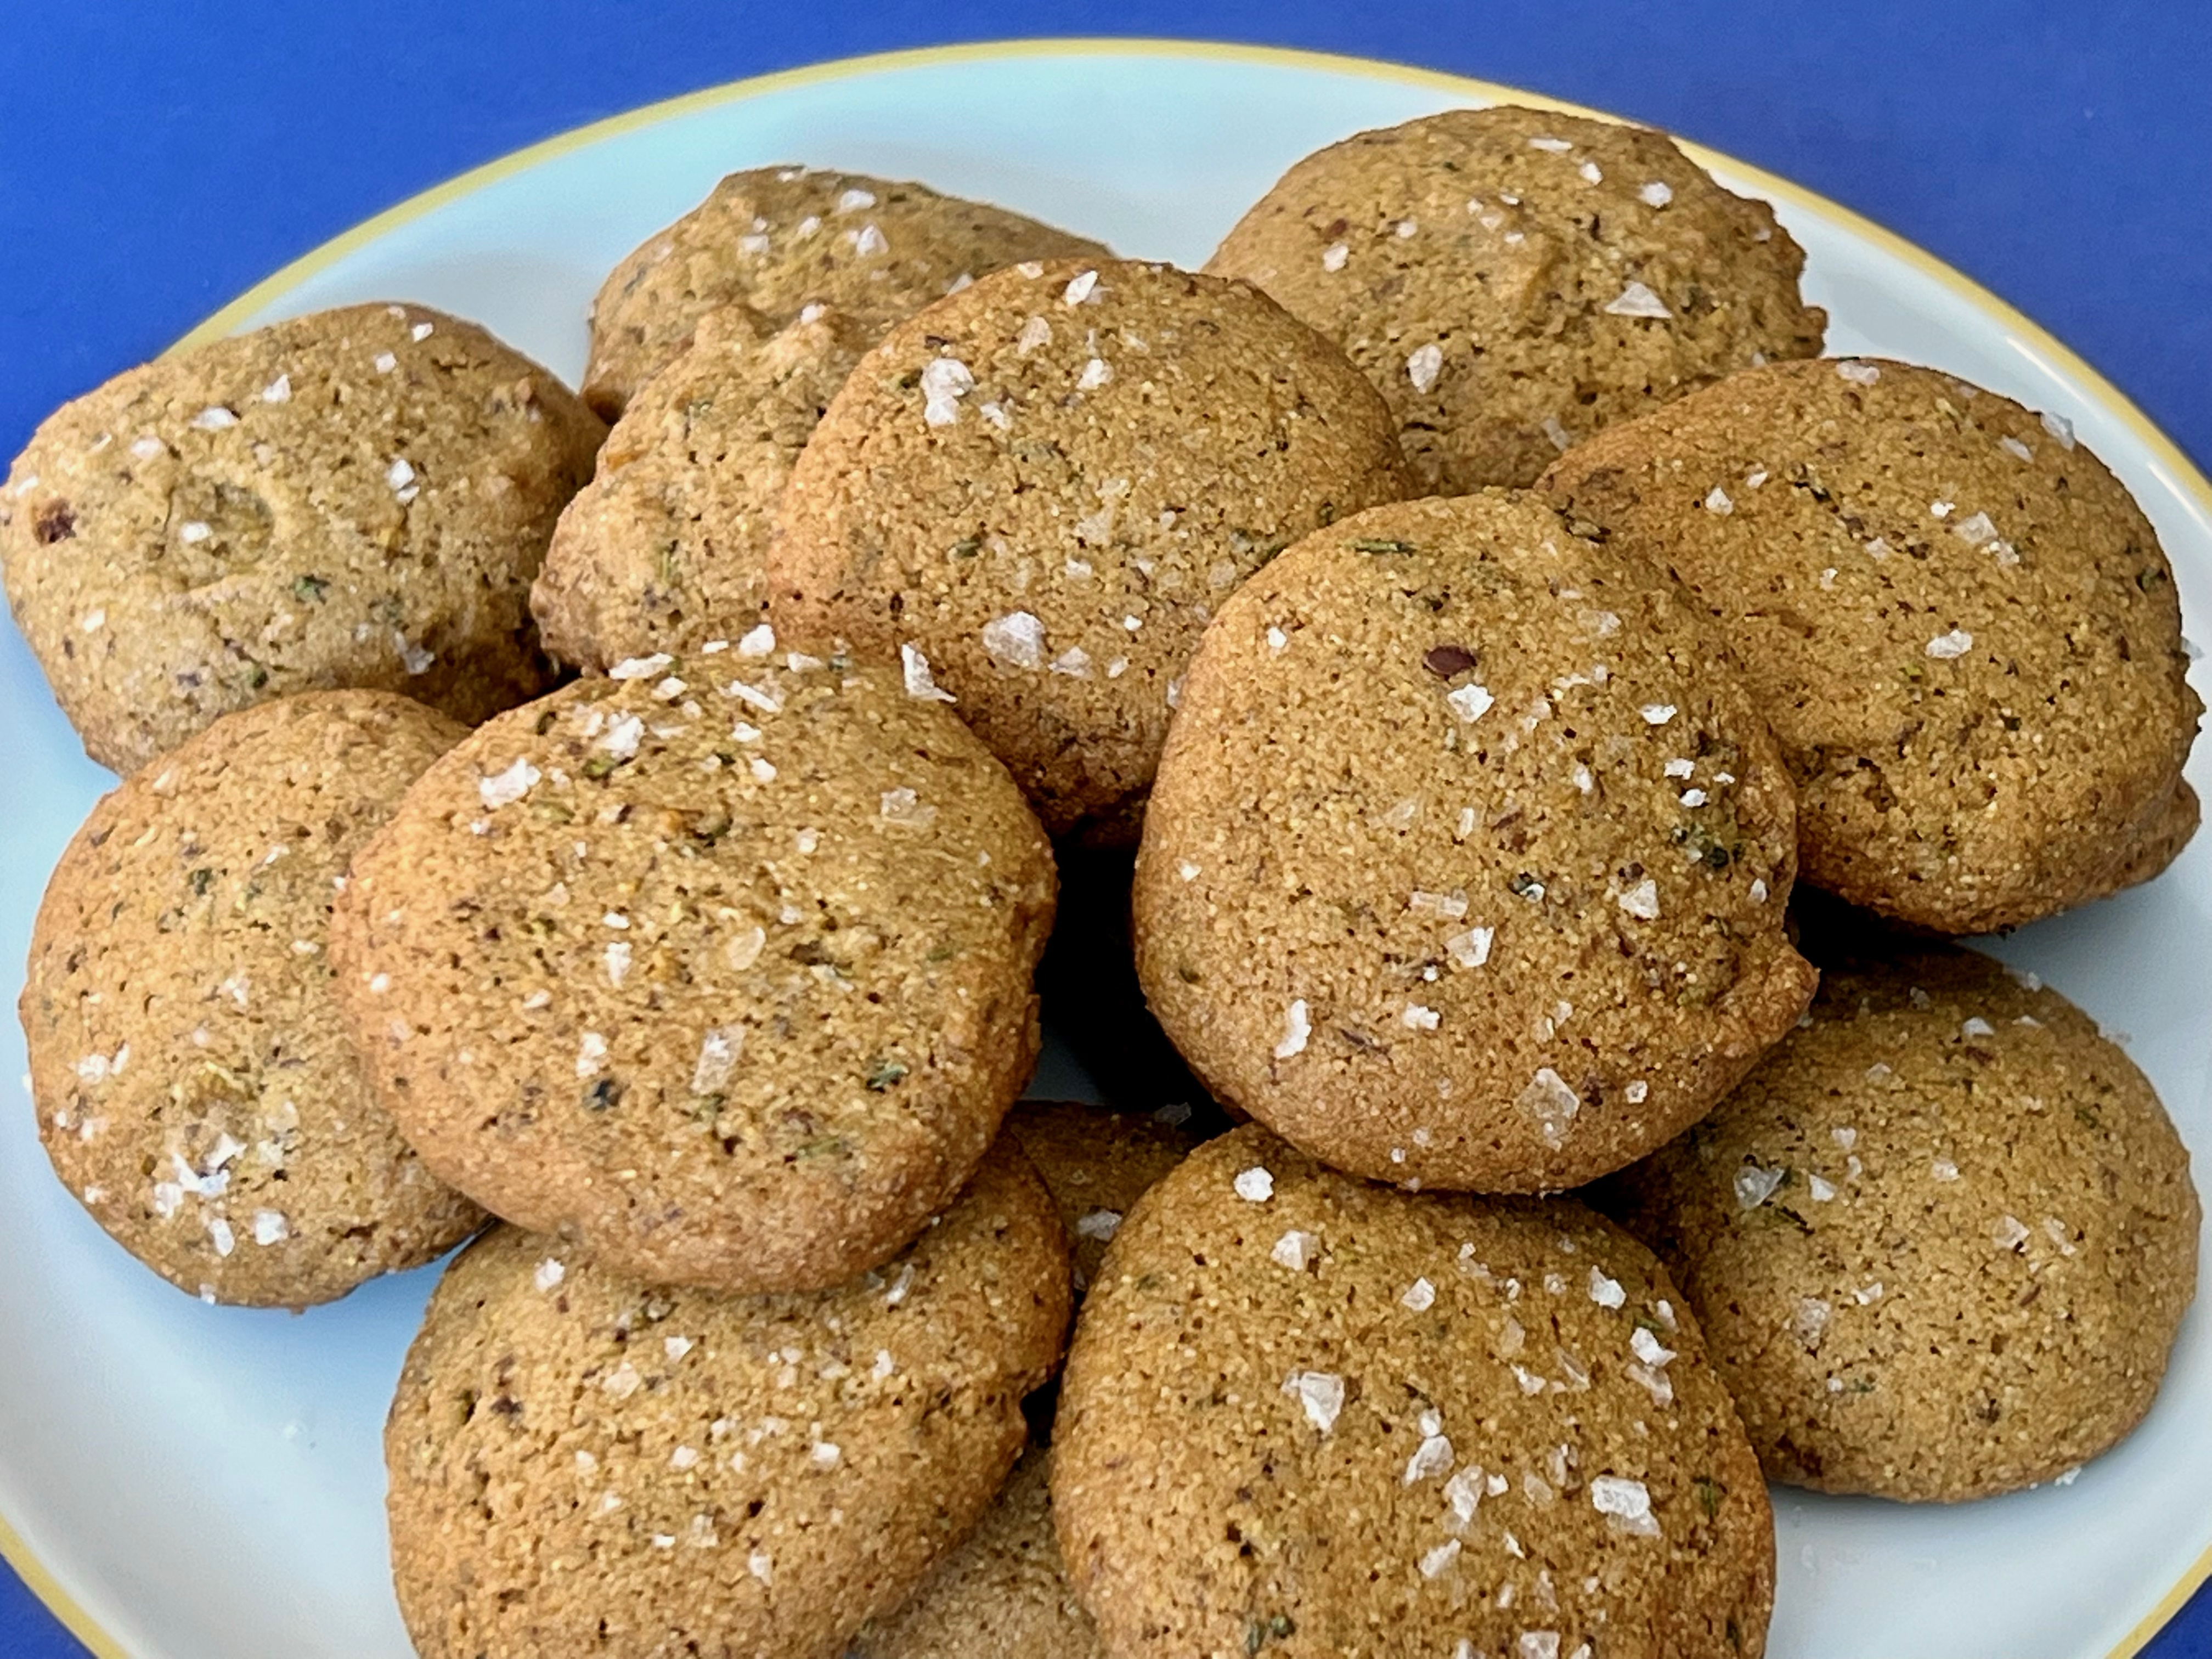 A plate of light brown cookies flecked with green and brown, with flake salt on top.